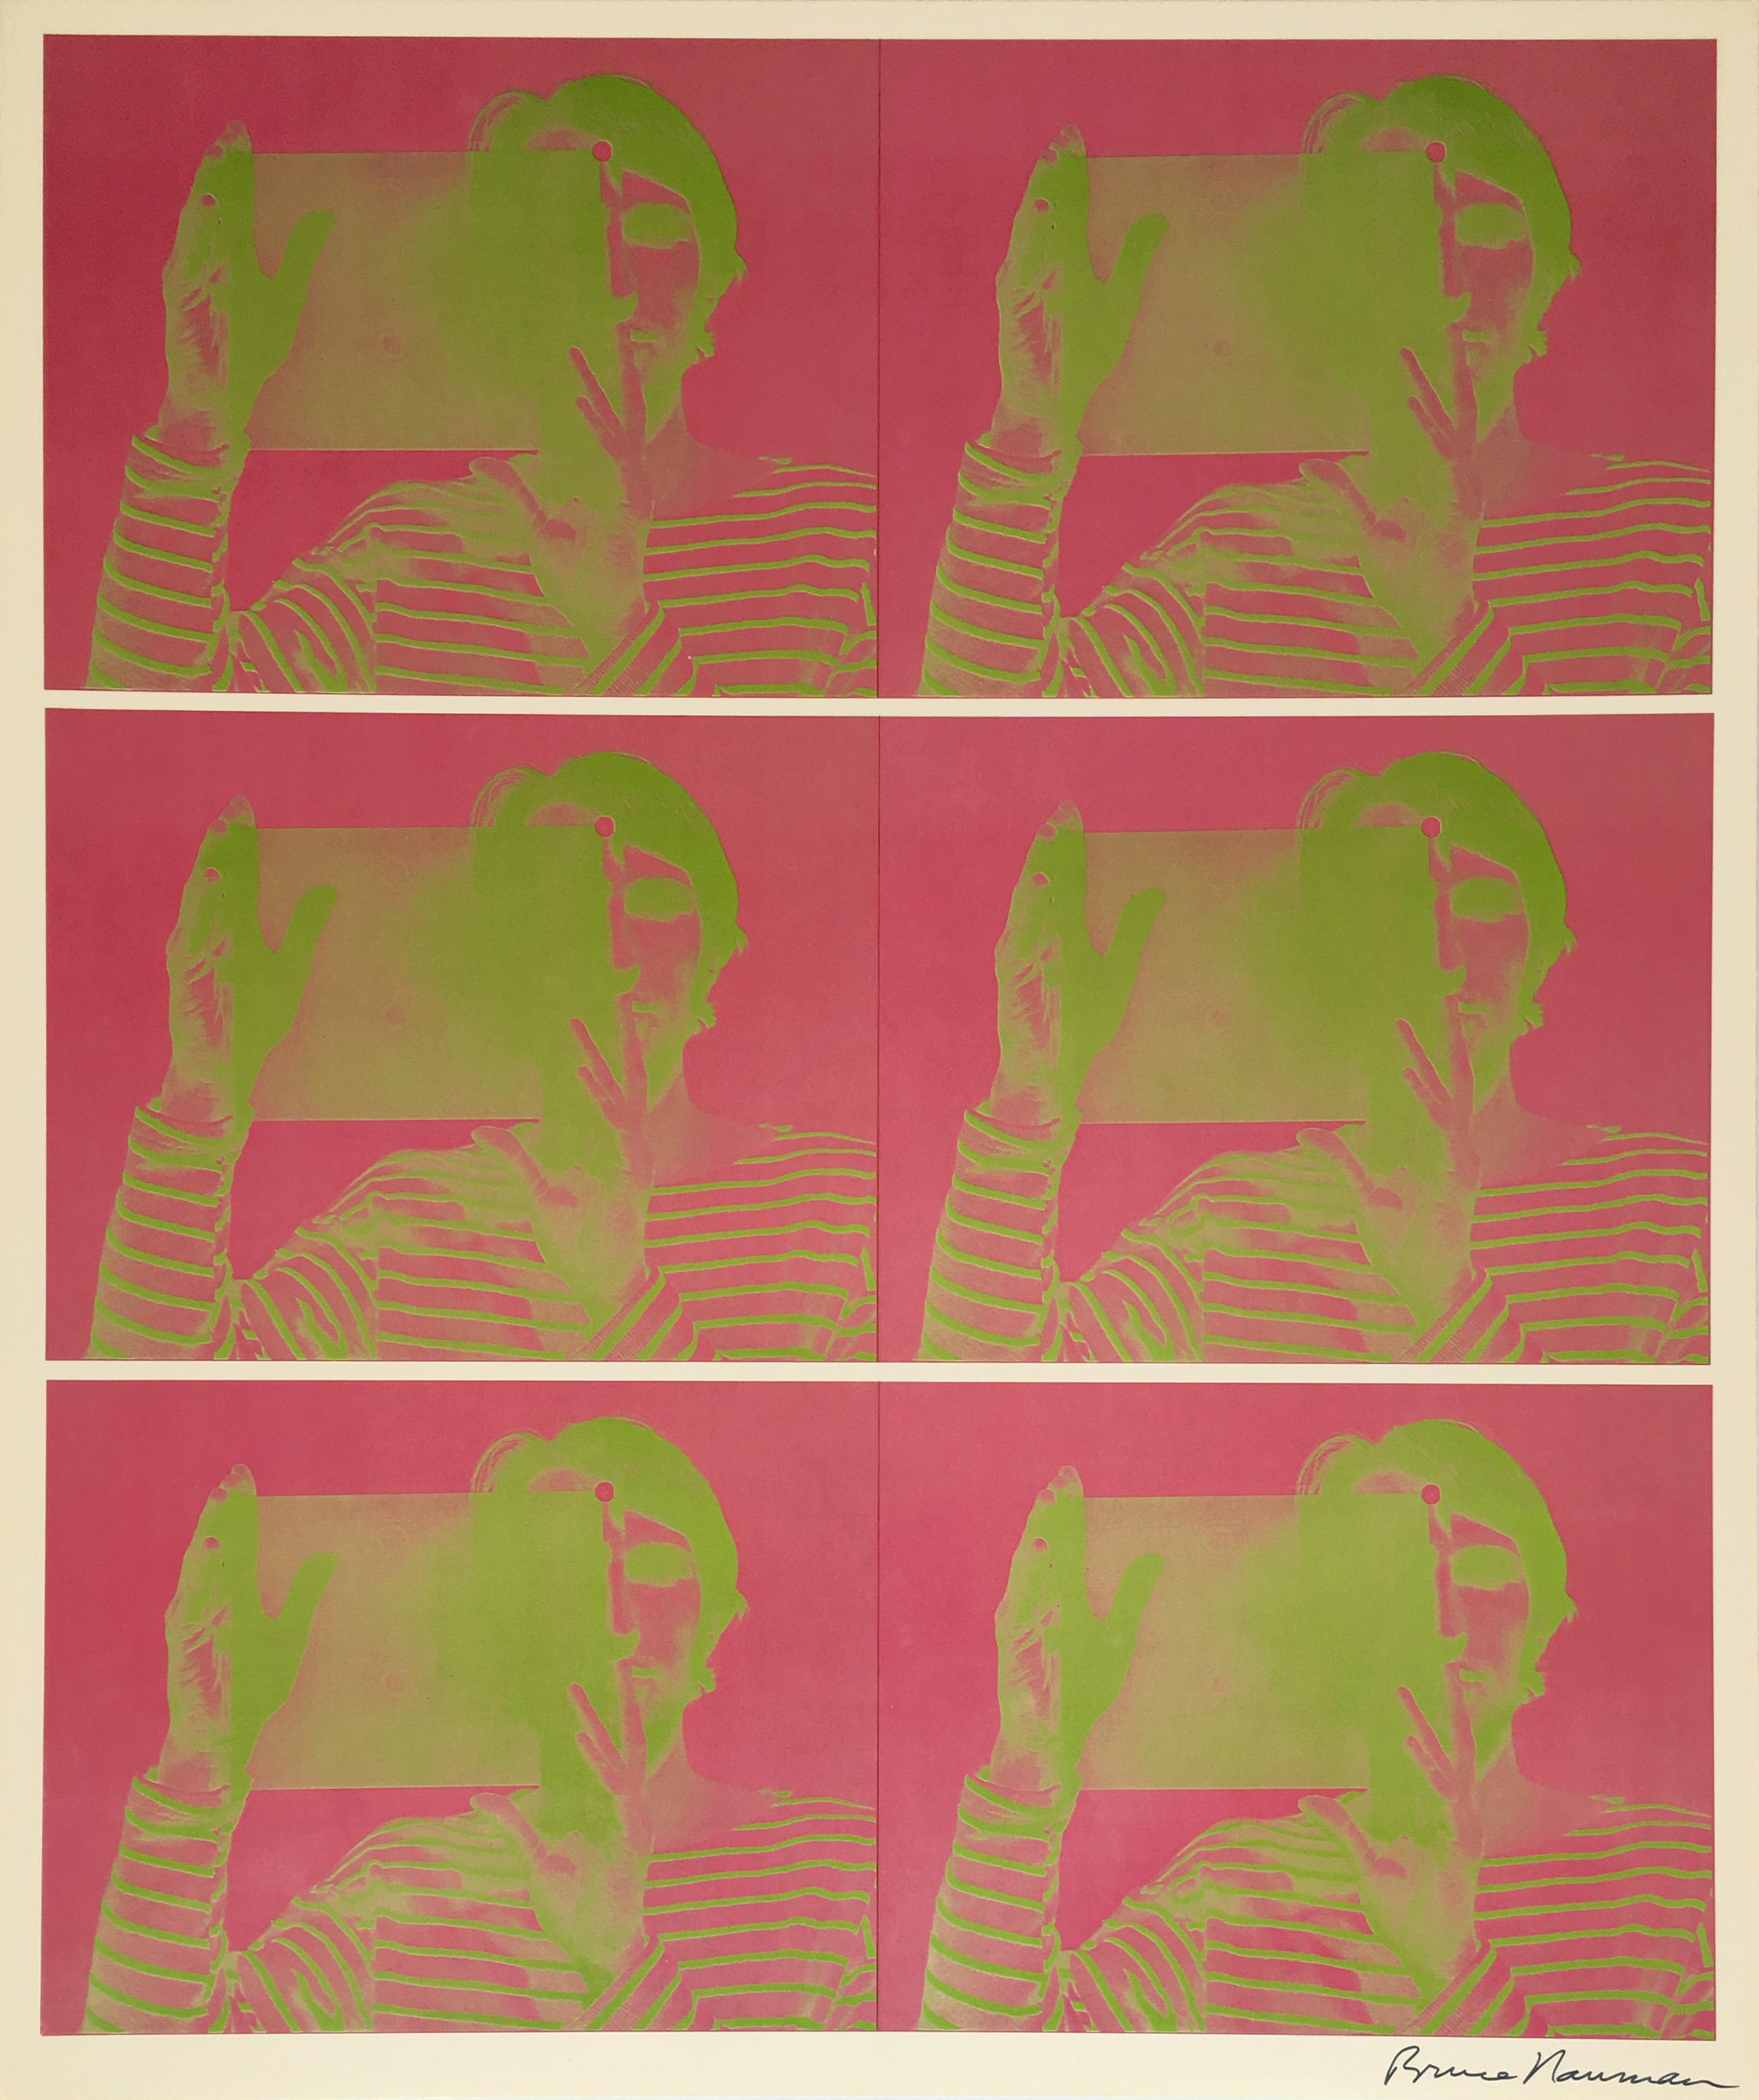 Bruce Nauman: Holograms, Videotapes, and Other Works"), Leo Castelli